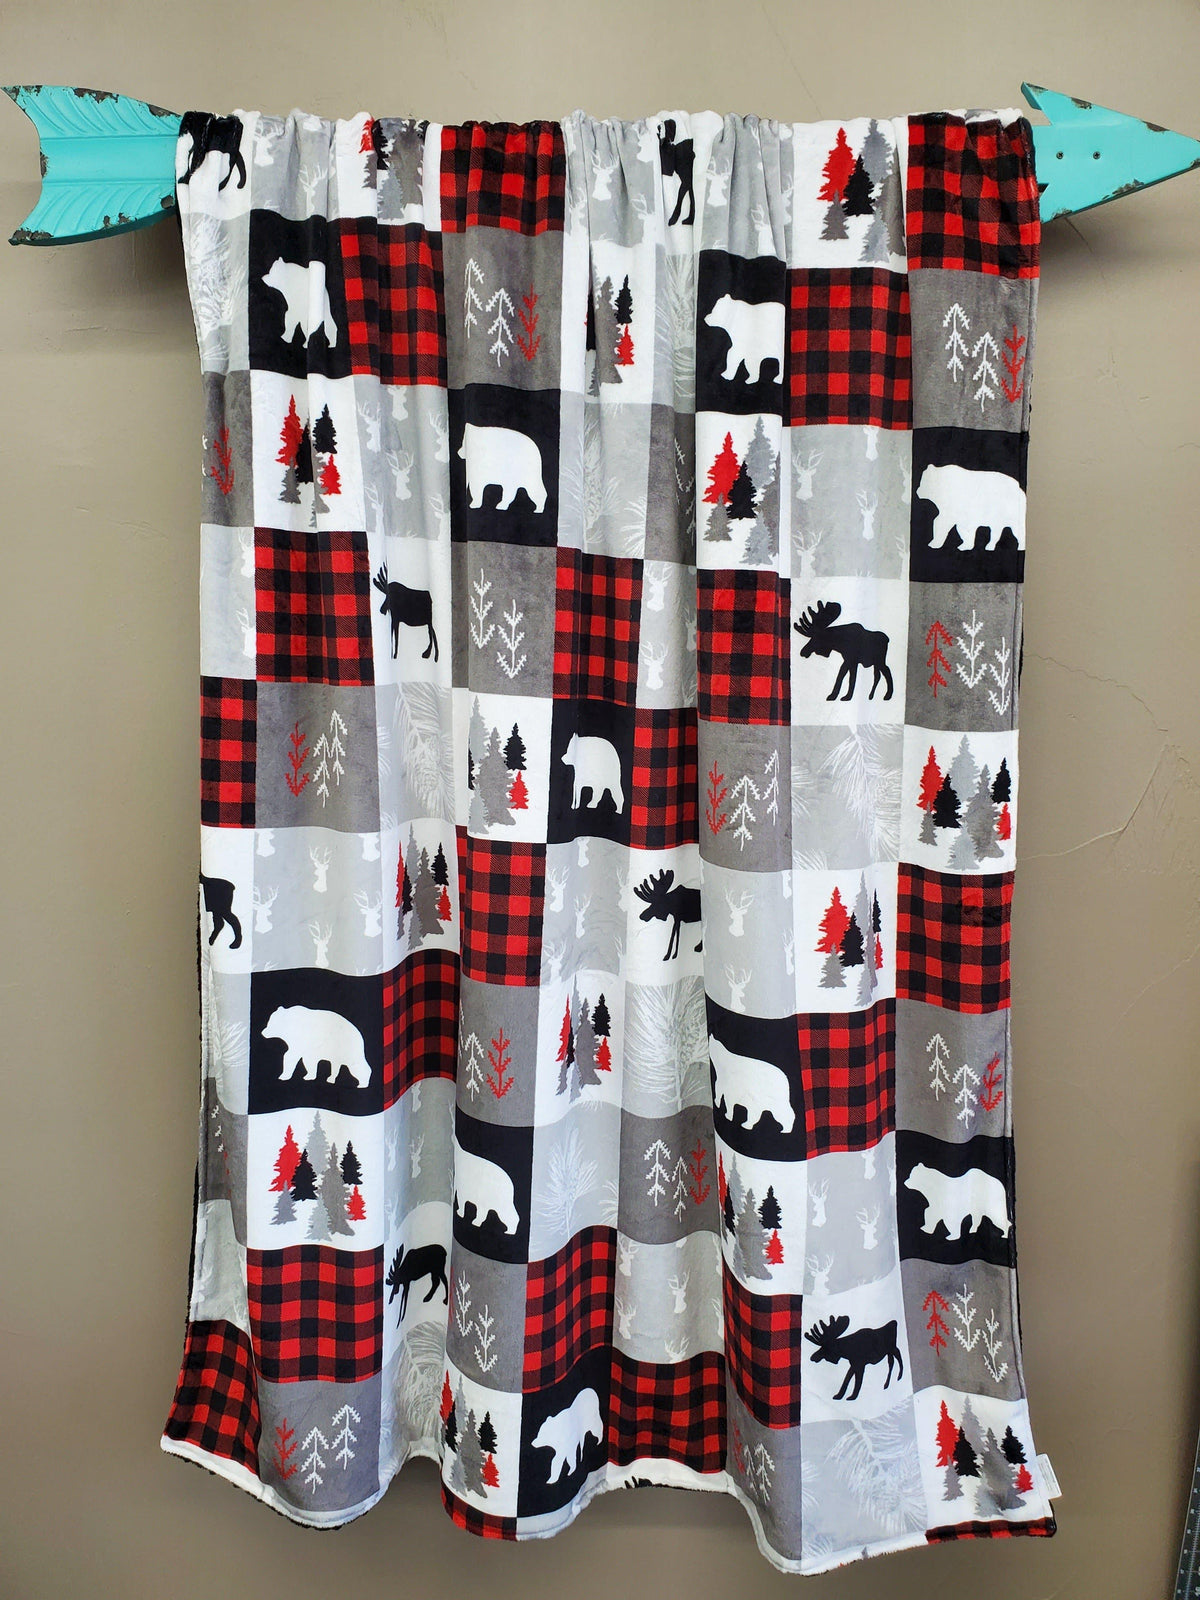 Twin, Full, or Queen Blanket - Patchwork Print Woodland Minky in Red, Black, Gray - DBC Baby Bedding Co 